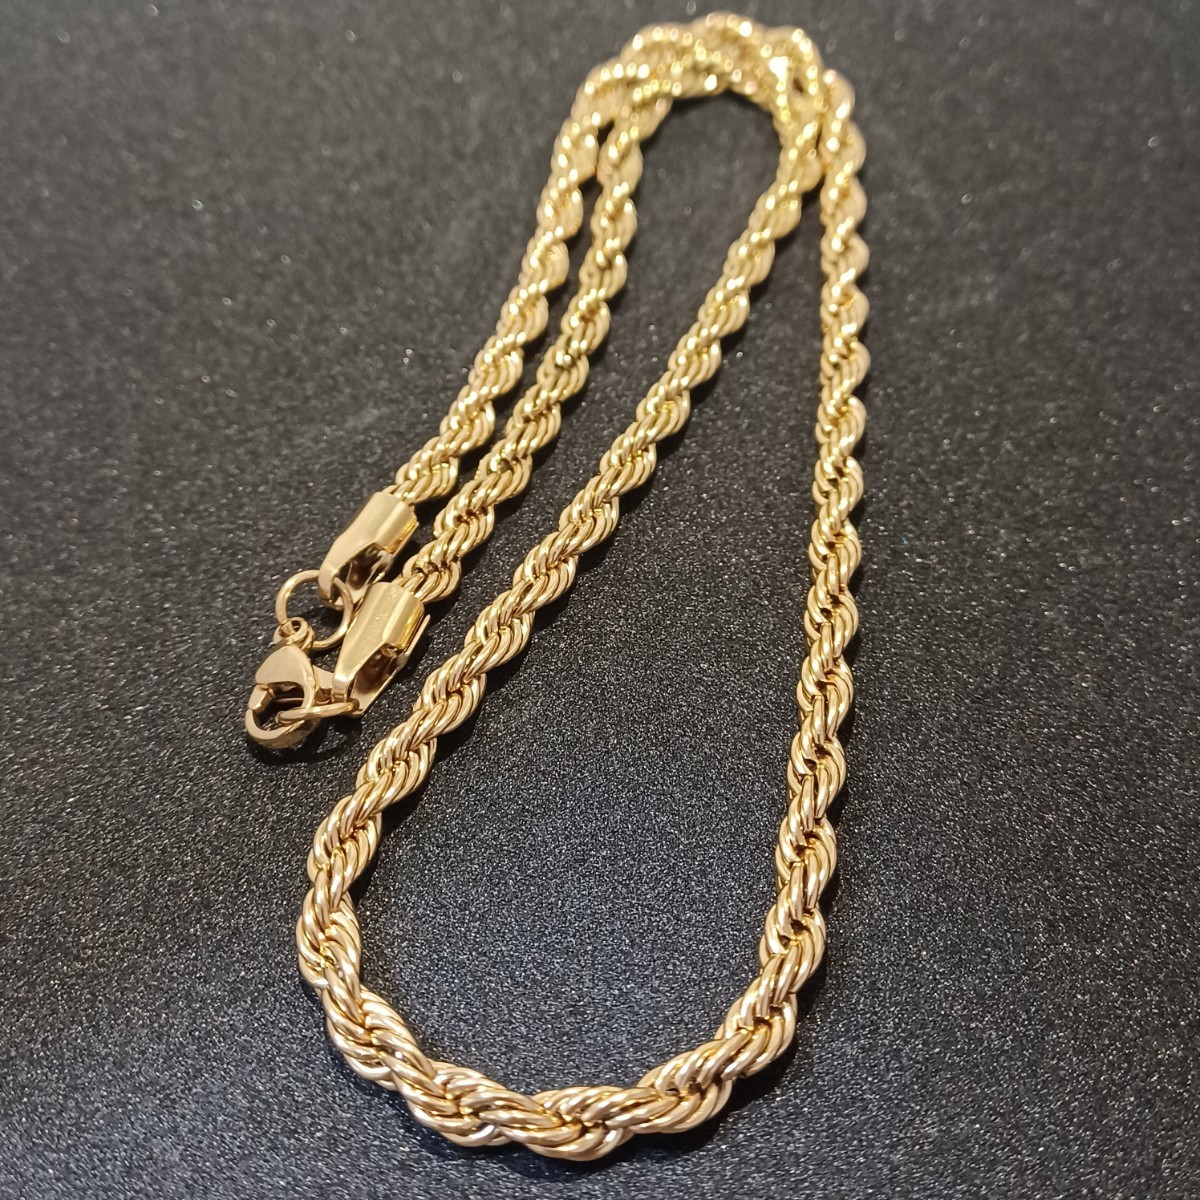  rope wire necklace Gold 5mm stainless steel chain stainless steel necklace men's necklace metal allergy correspondence 